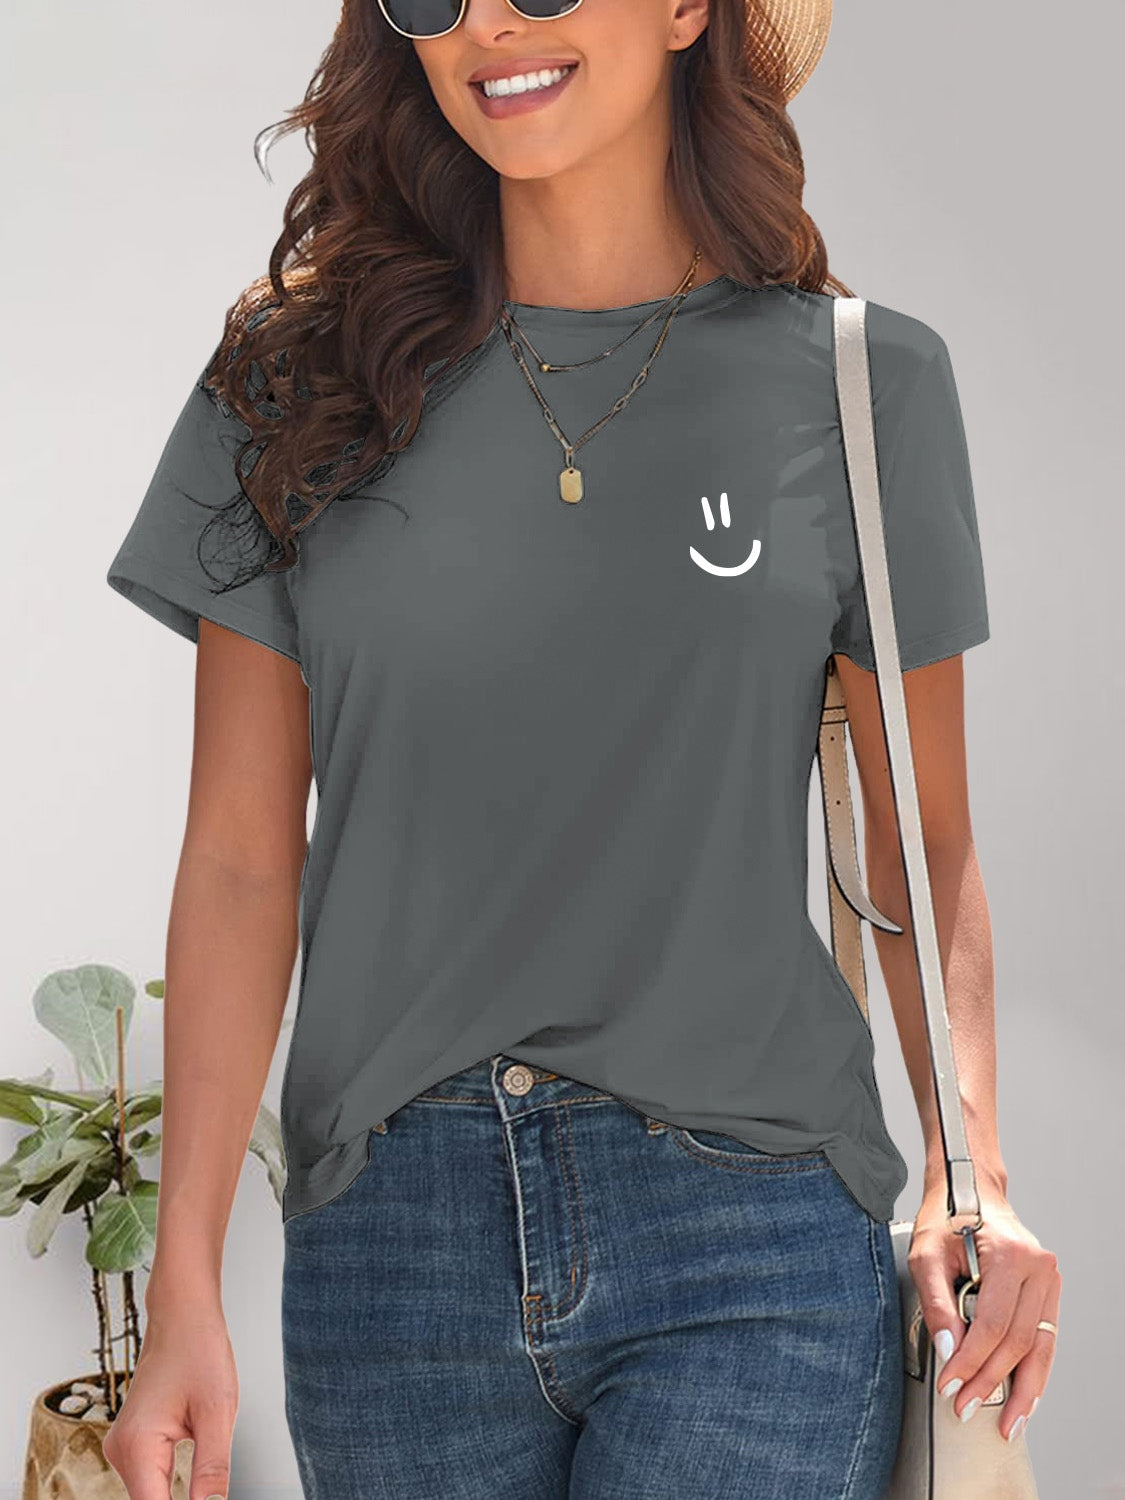 Smile Graphic Round Neck Short Sleeve T-Shirt Charcoal S 